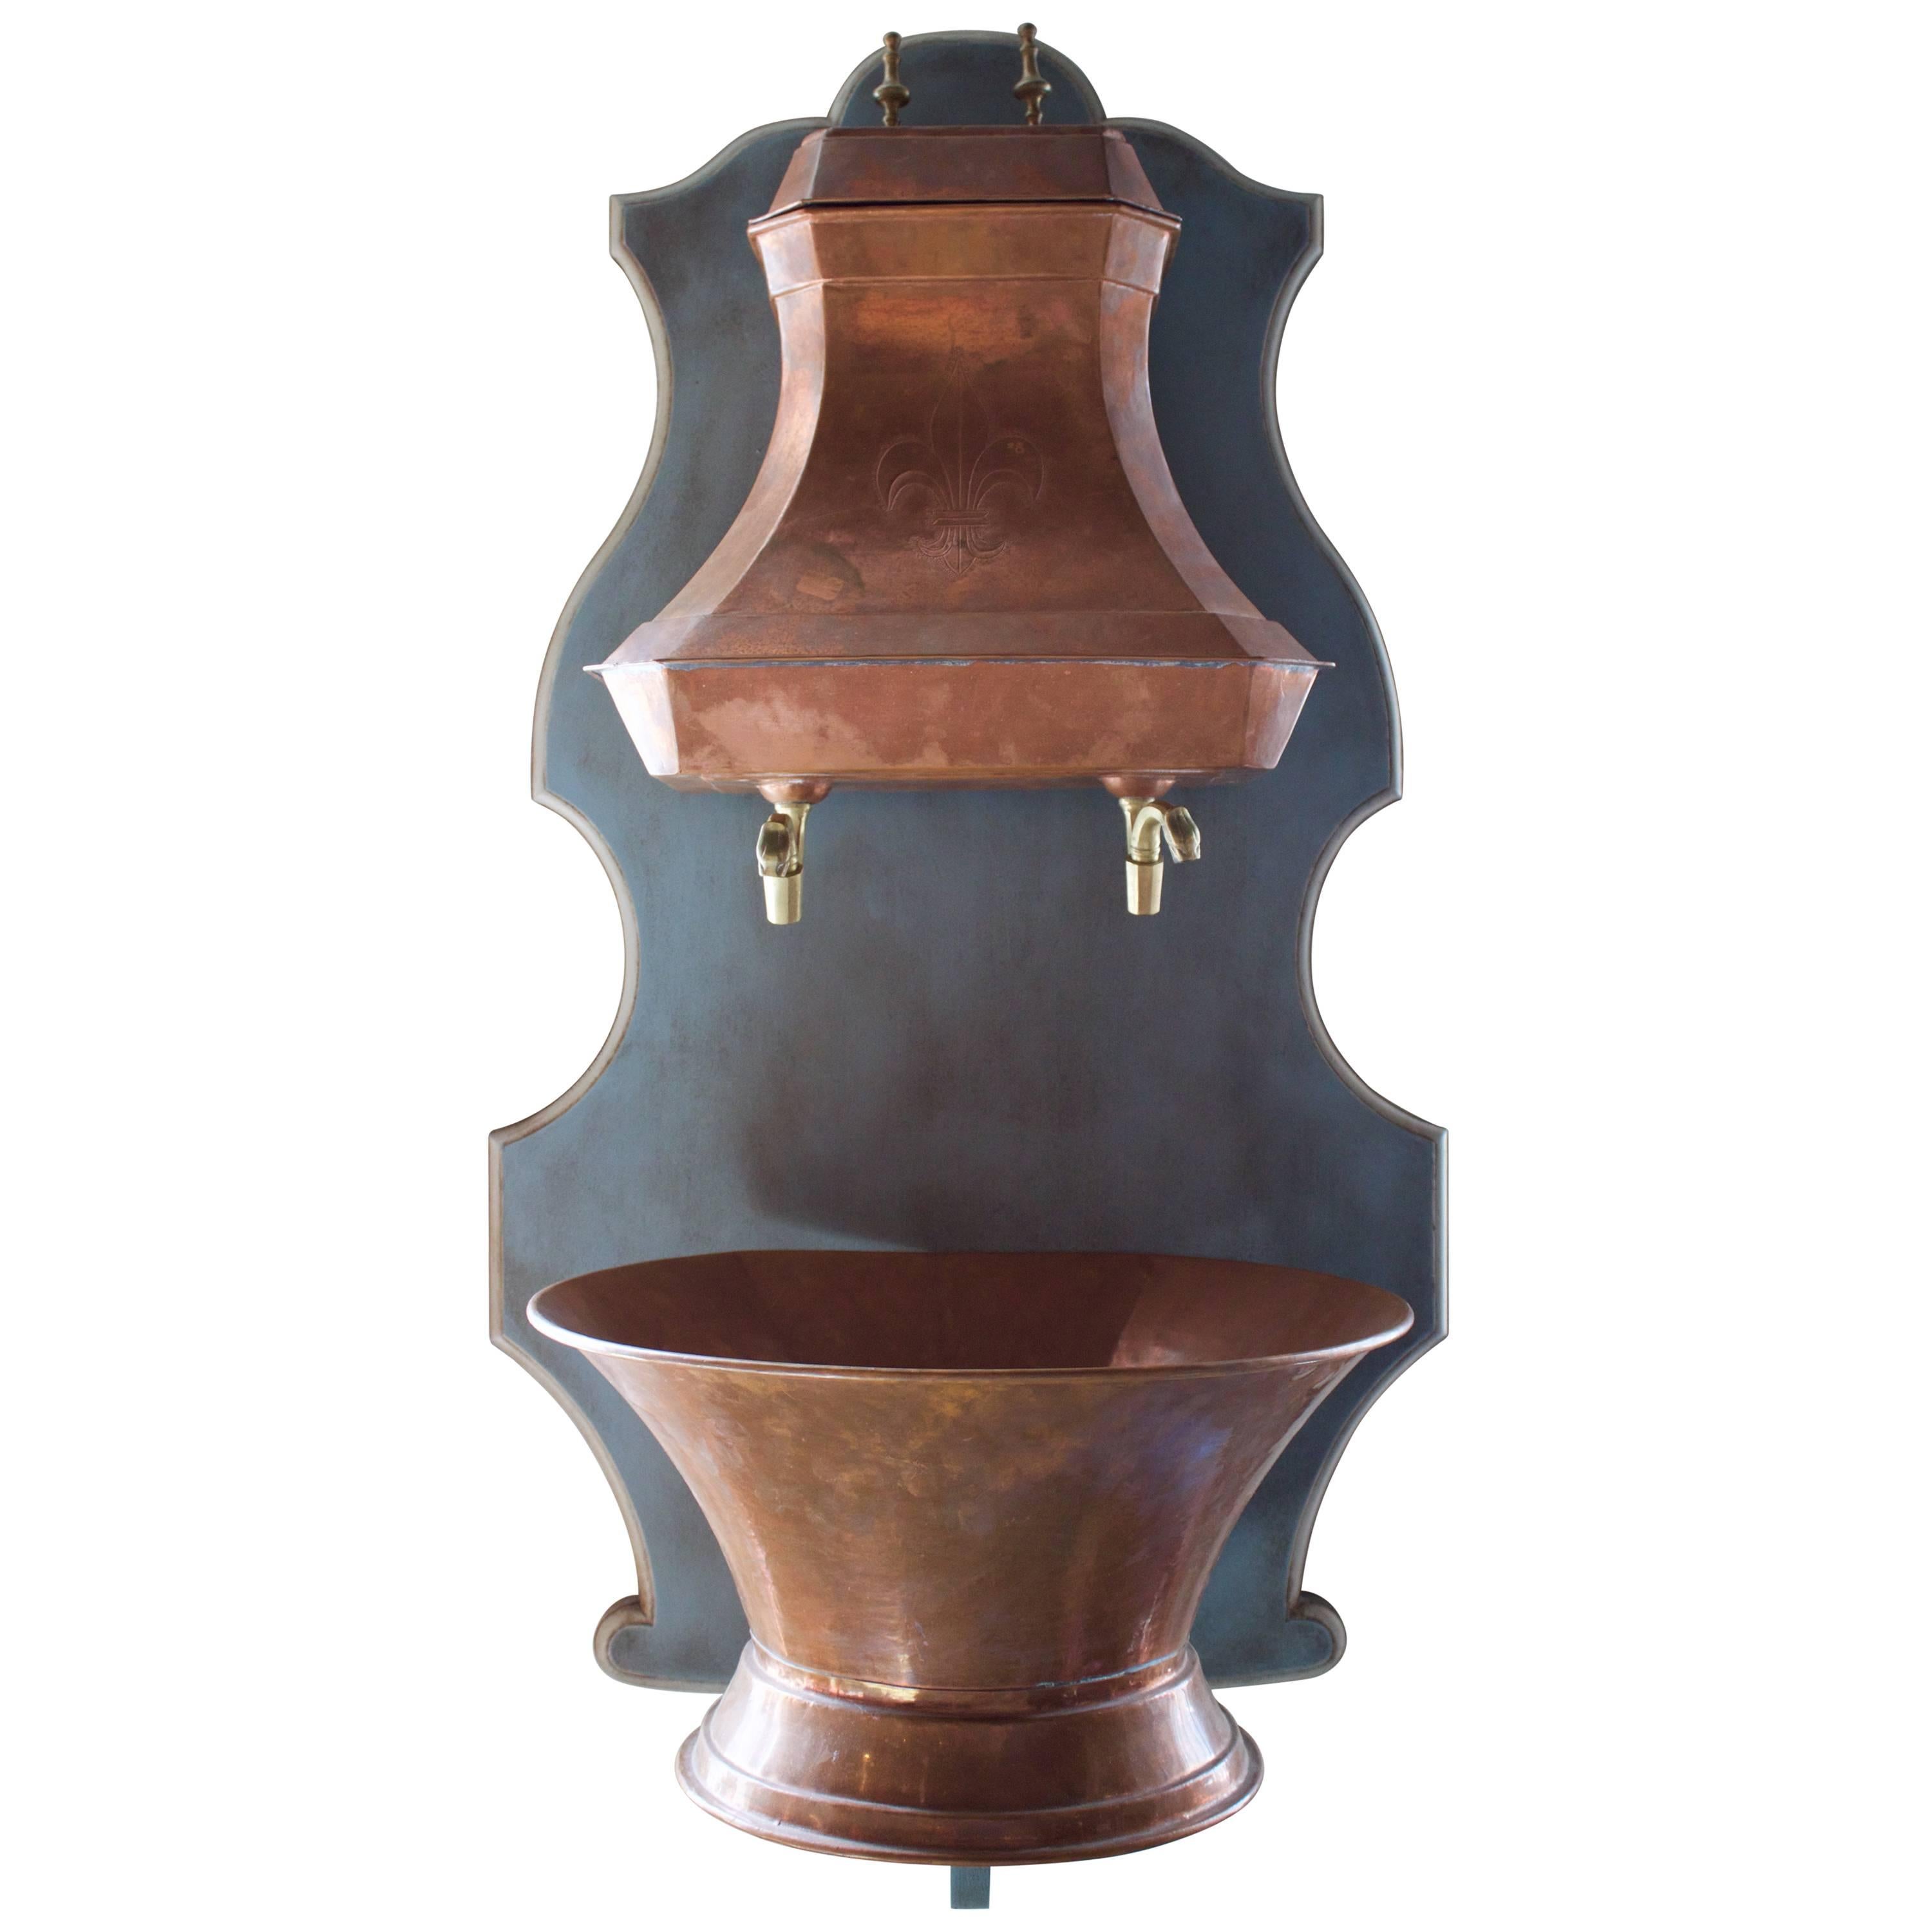 Early 19th Century French Copper Wall Fountain or Lavabo